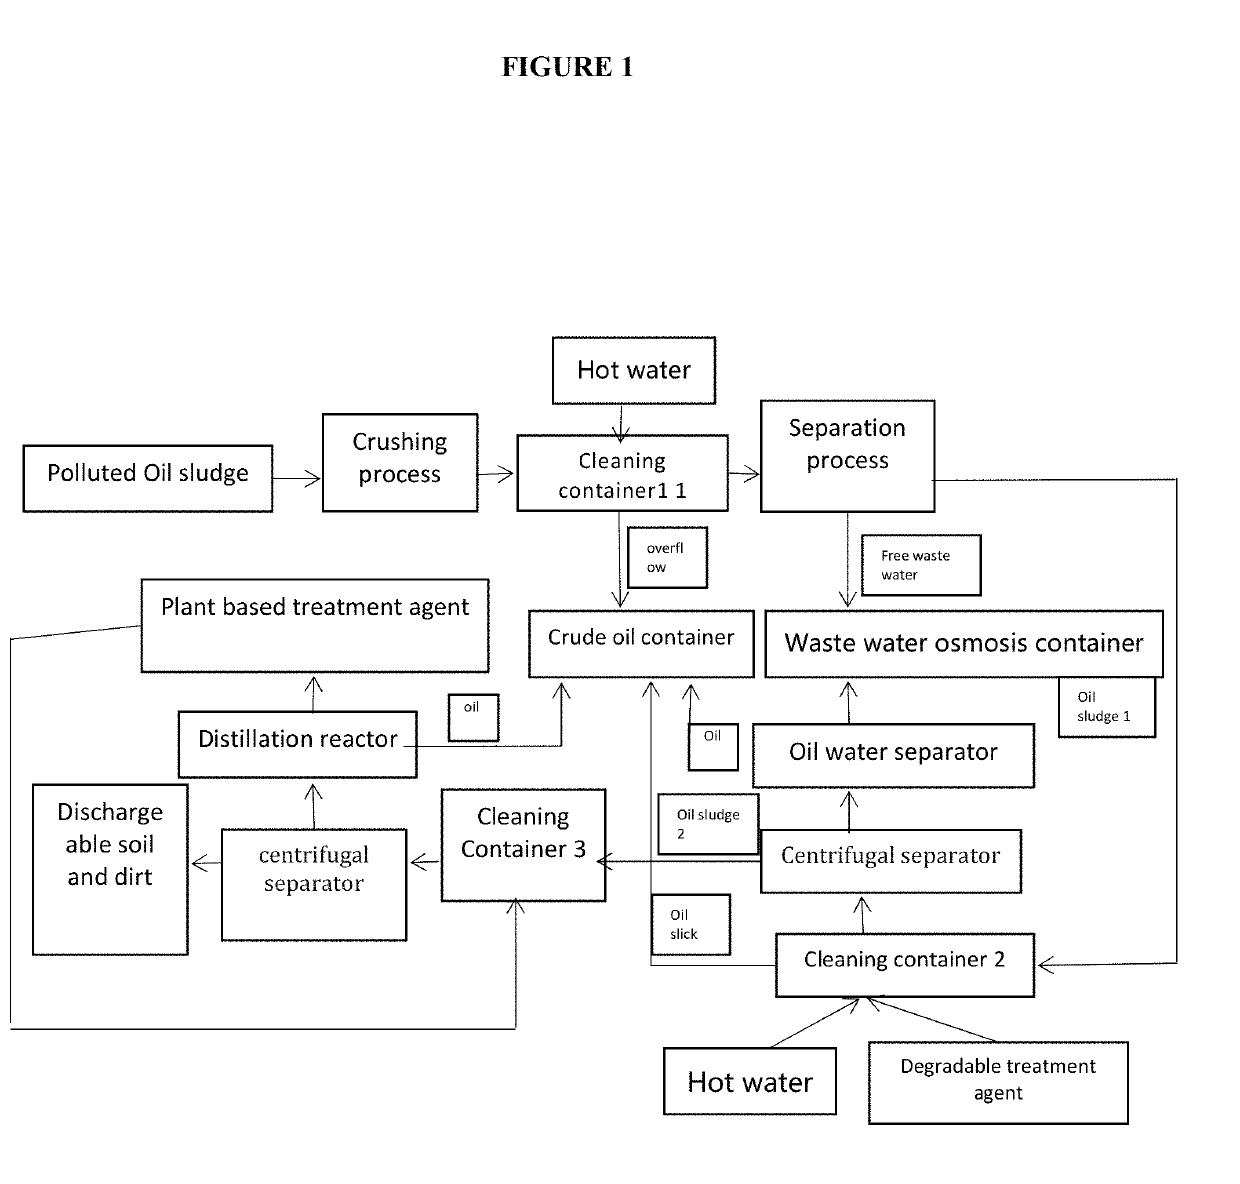 Treatment Process for Polluted Oil Sludge